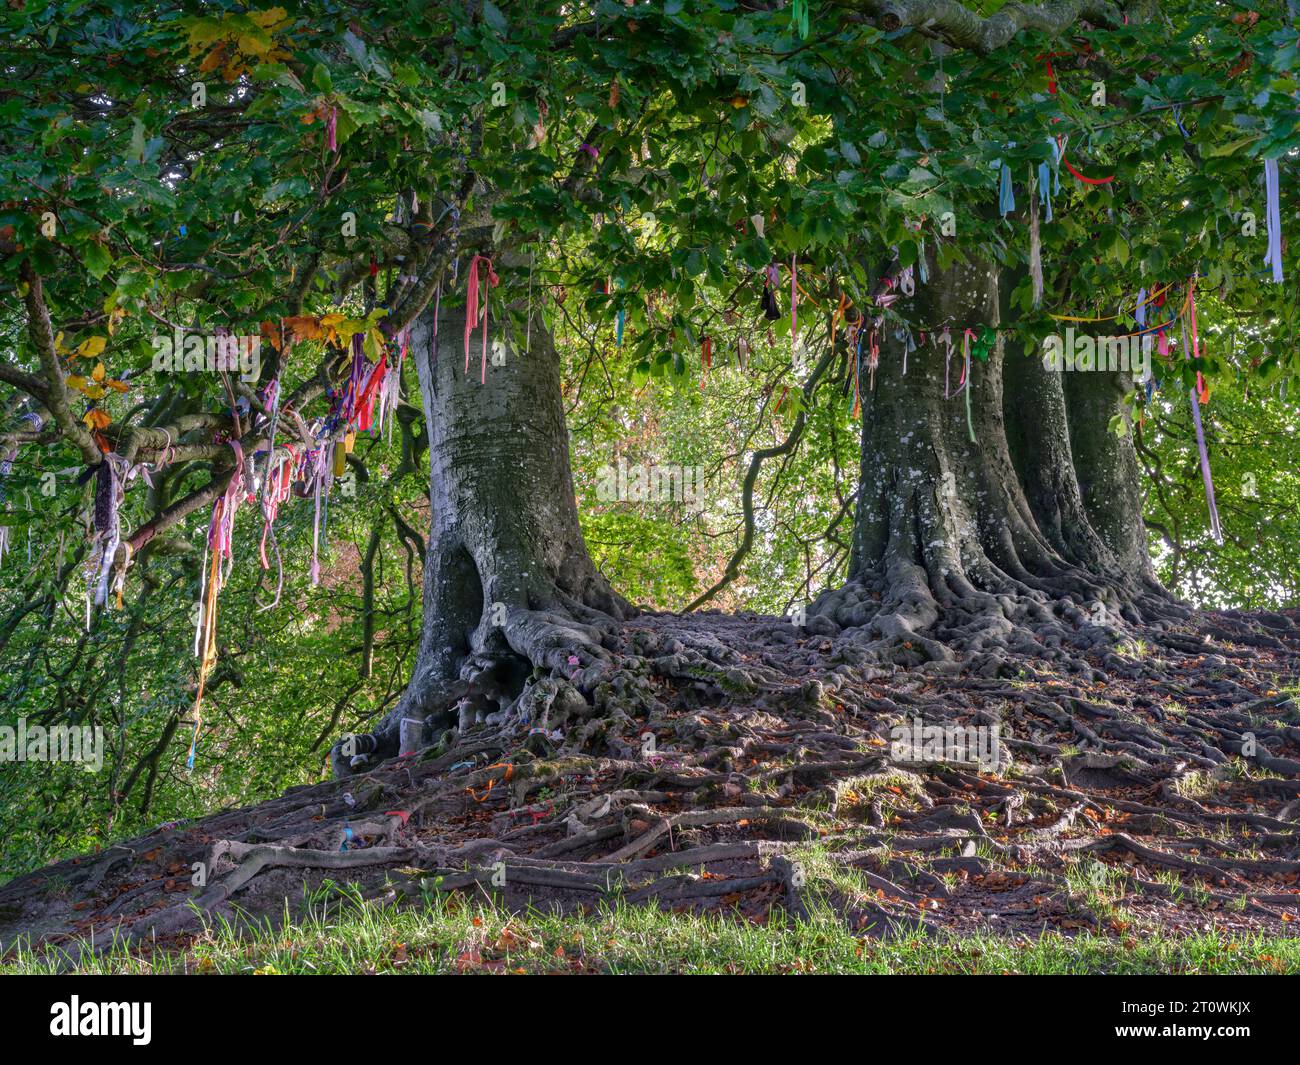 Avebury, Wiltshire - England. Ribbons and offerings tied to the branches and roots of the ancient Beech trees at Avebury in Wiltshire. Contemporary my Stock Photo